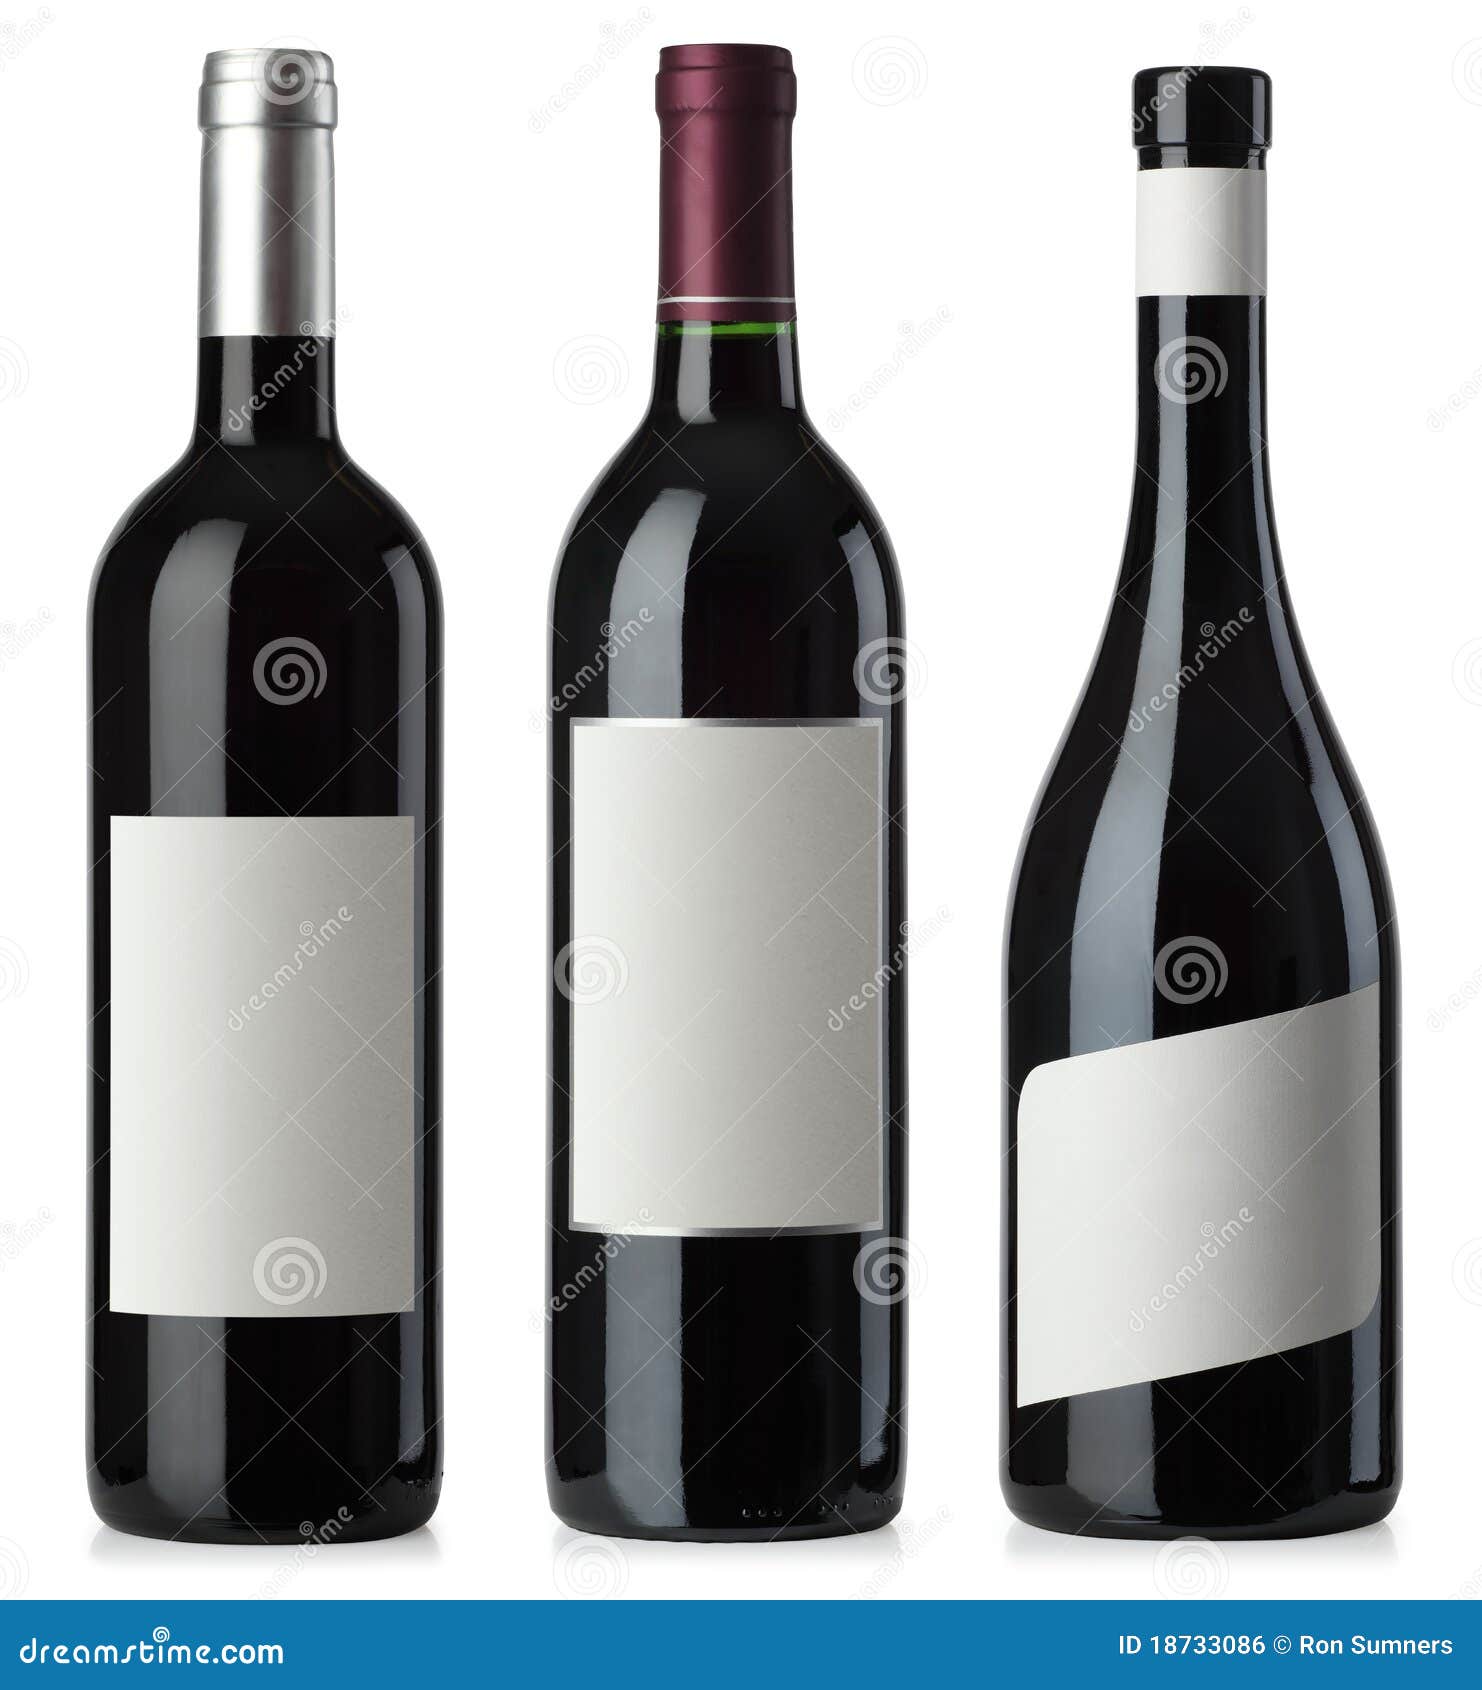 ... wine bottles with blank labels. Separate clipping paths for bottles